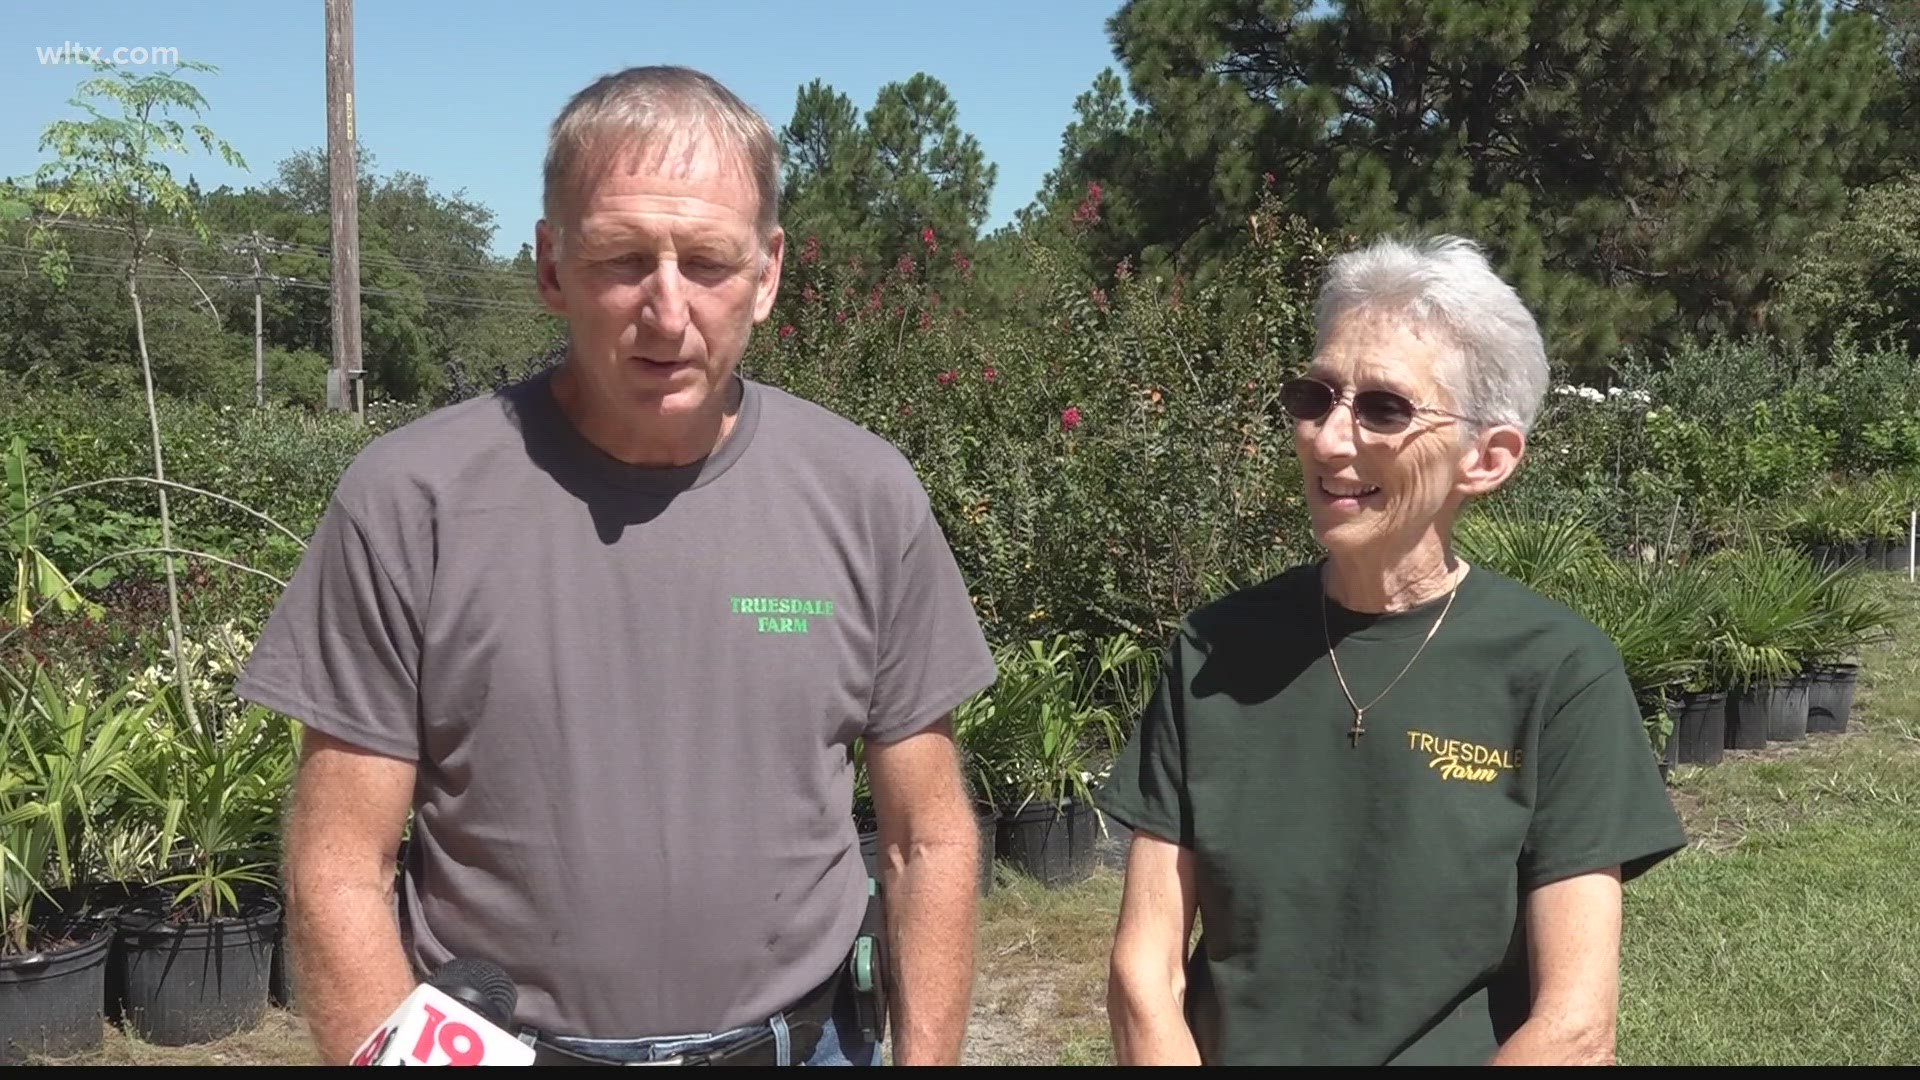 Trusdale Farms has been selling plants each year to raise money for the Kershaw County Community Medical Clinic.